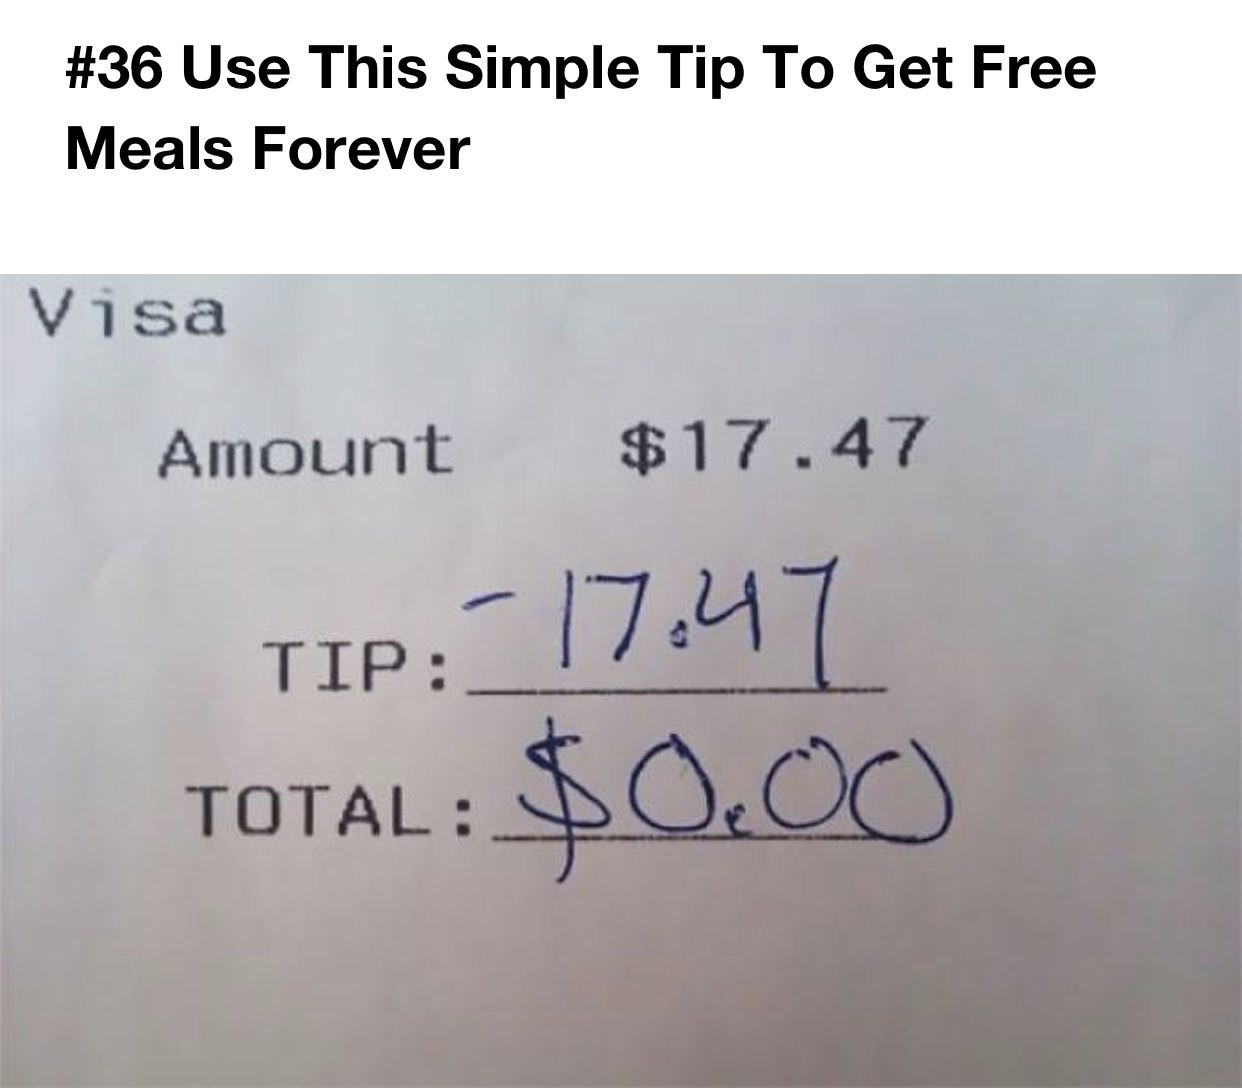 funny life tips - Use This Simple Tip To Get Free Meals Forever Visa Amount $17.47 Tip Total $0.00